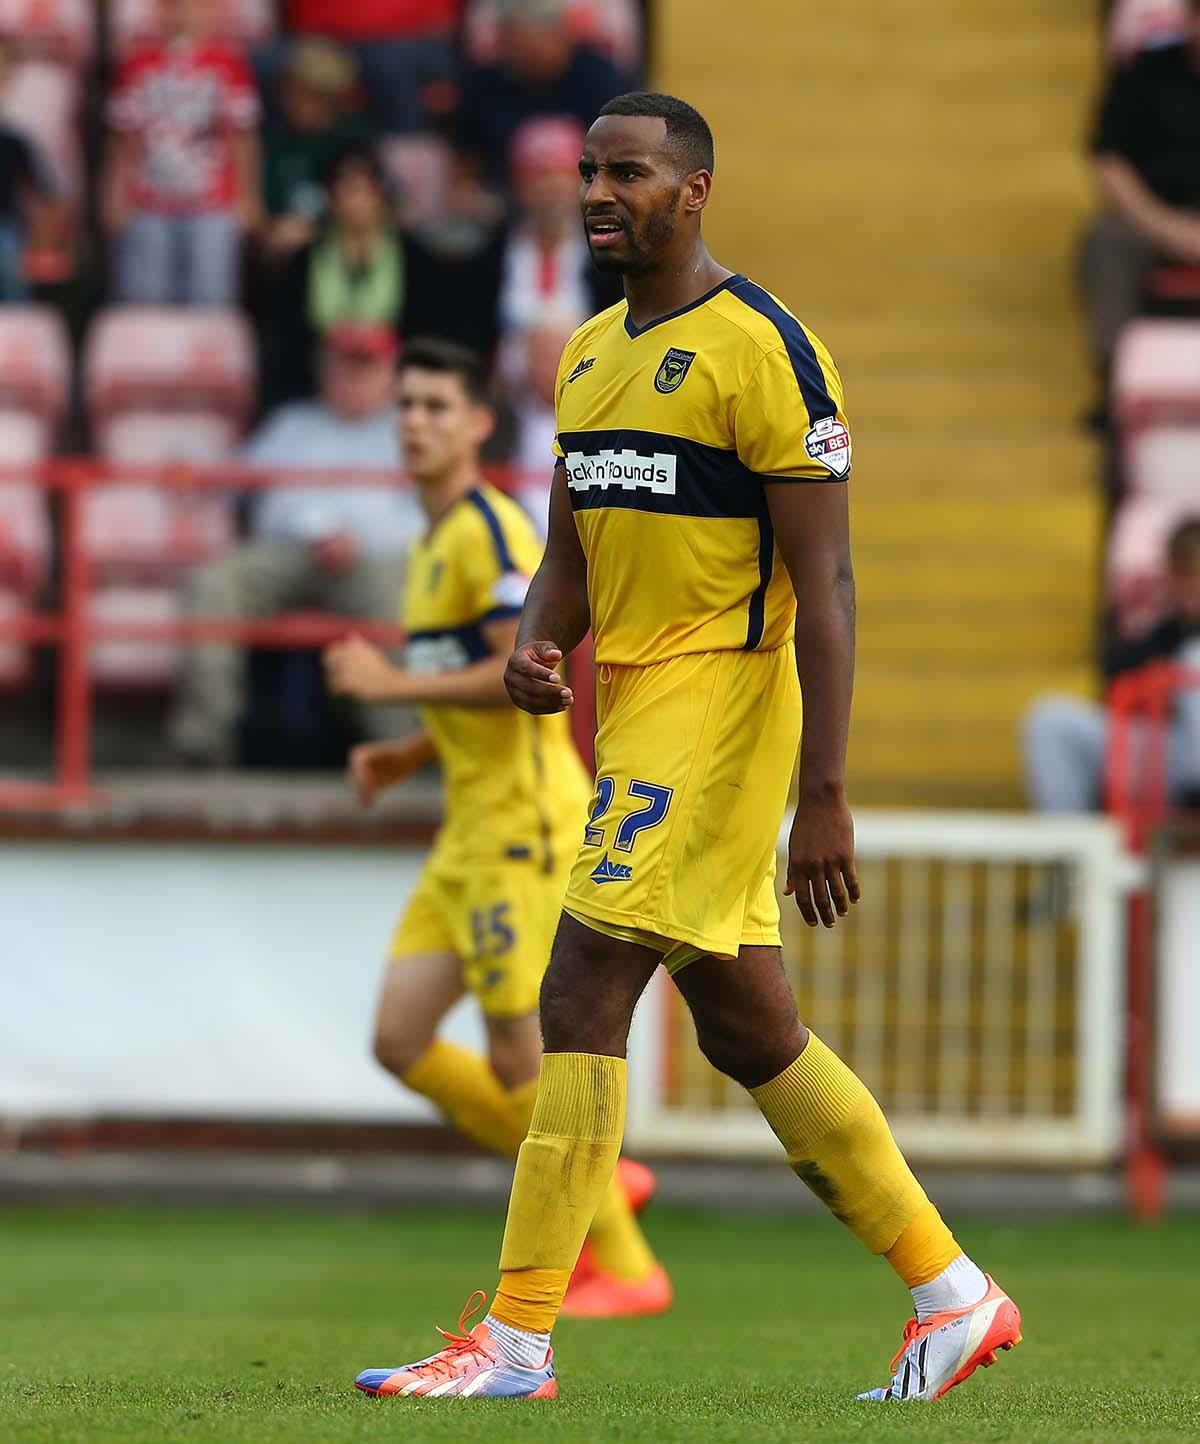 Oxford United play away at Exeter City